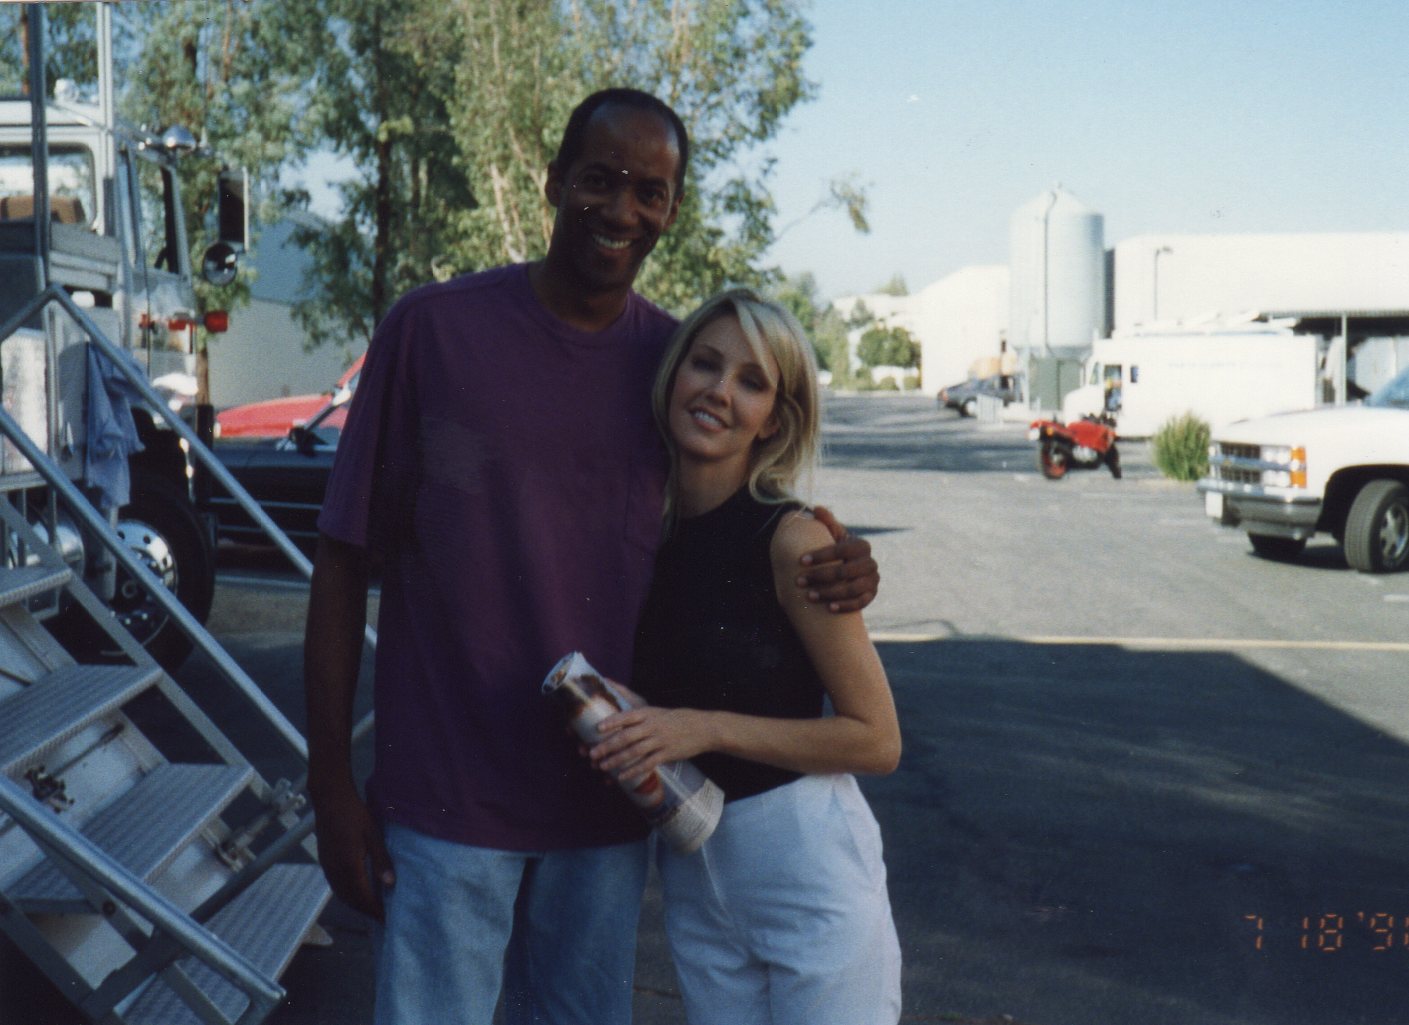 Jeff Mosley and Heather Locklear